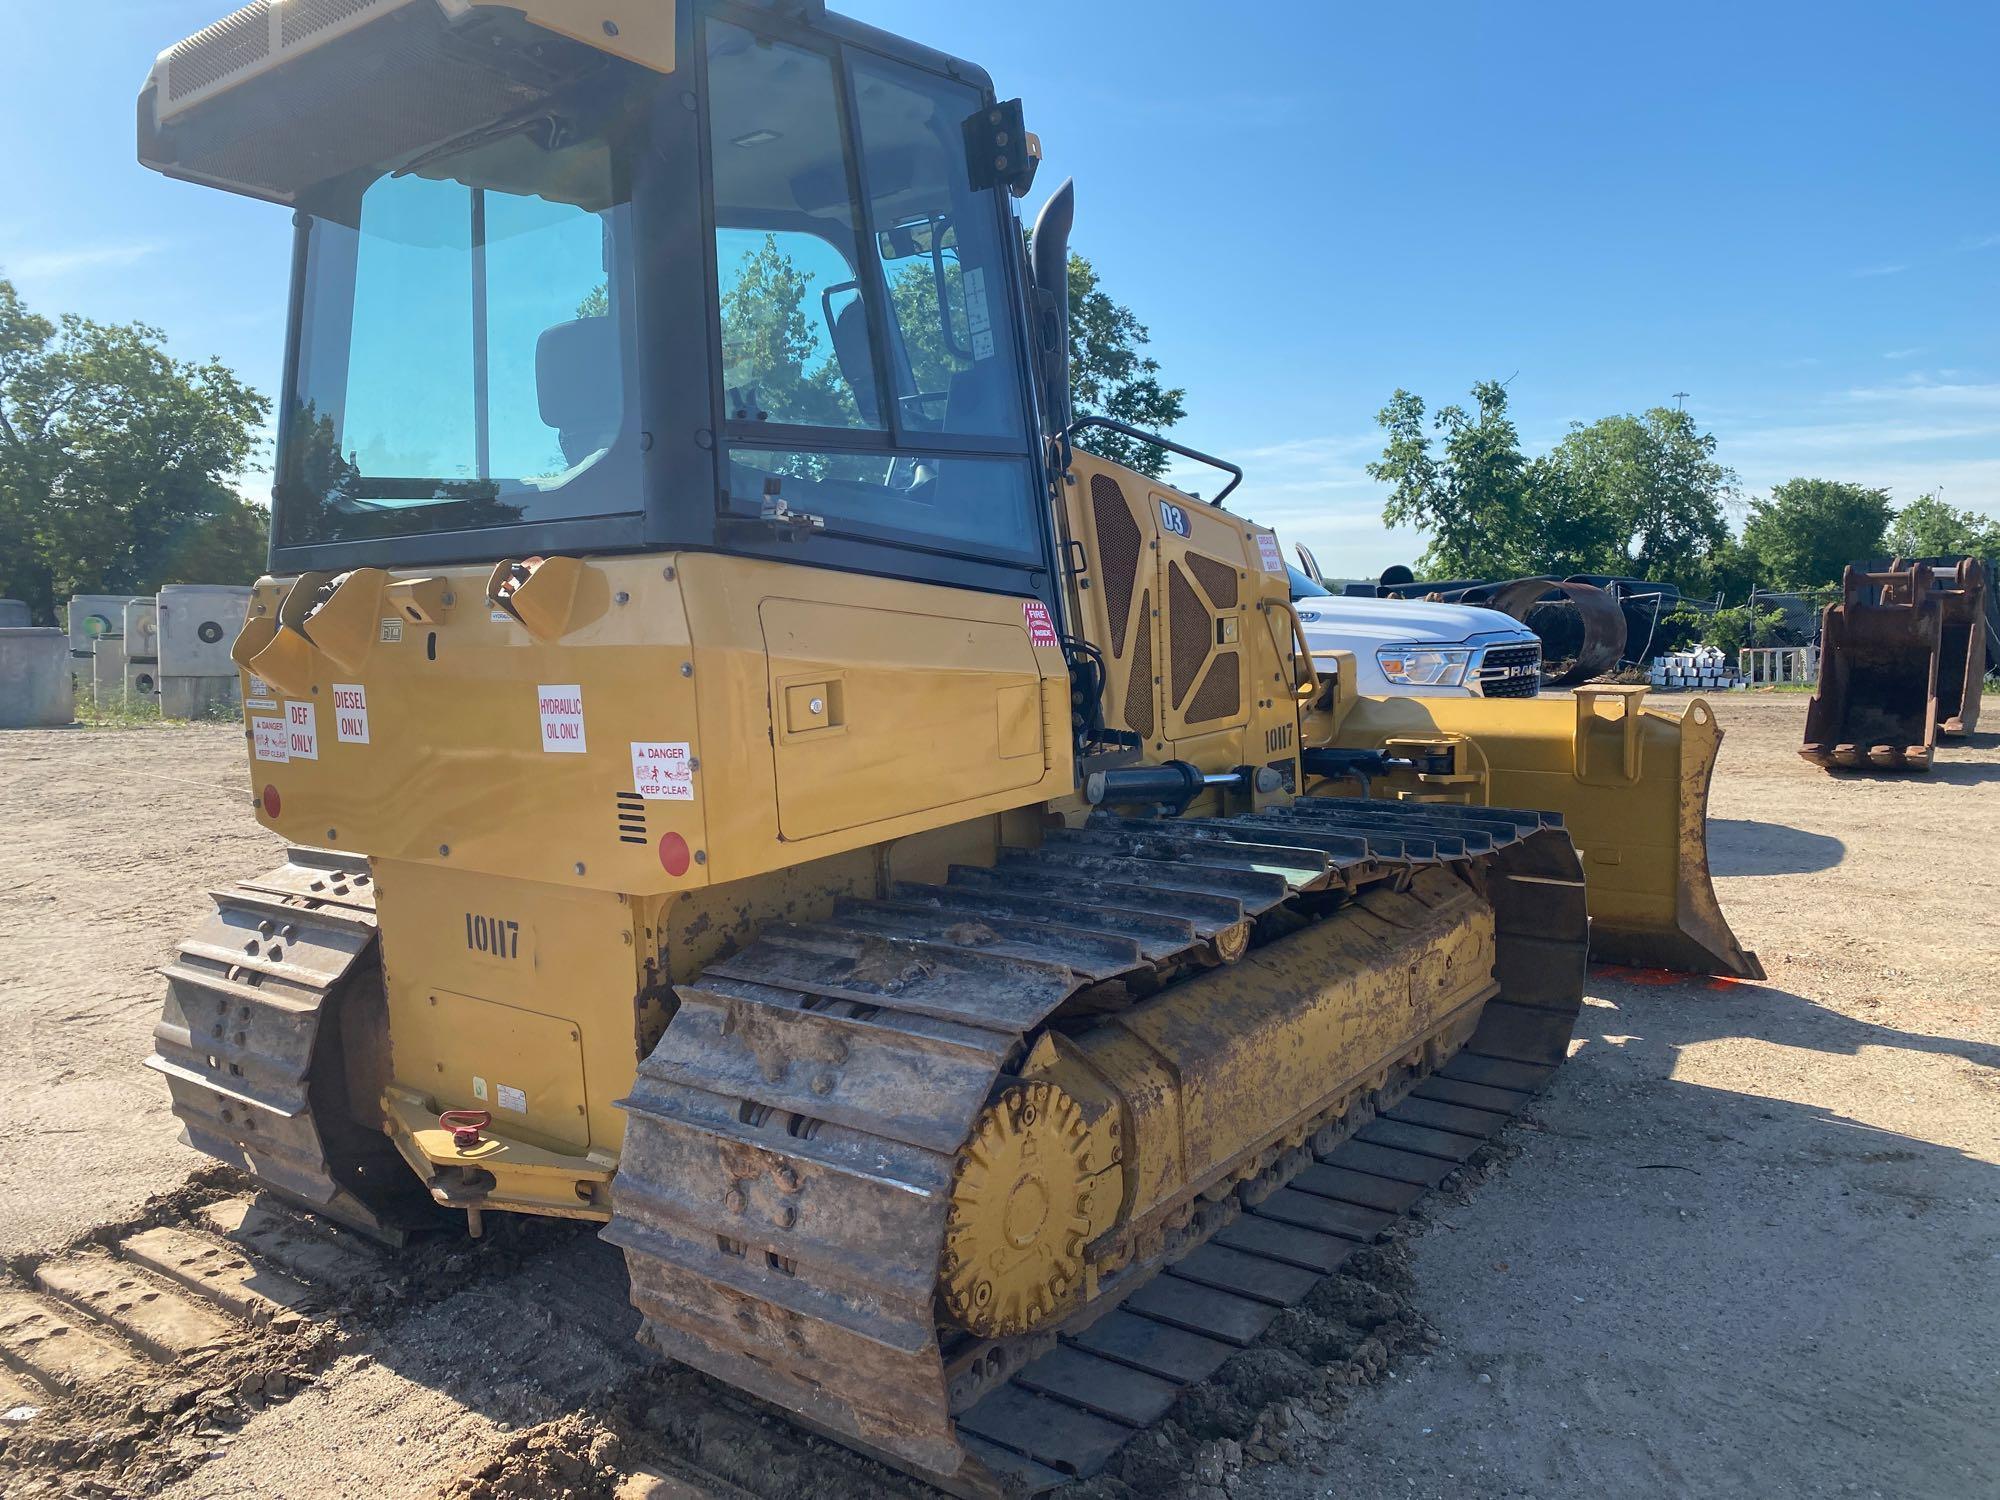 2021 CAT D3LGP CRAWLER TRACTOR SN:XT500202 powered by John Deere diesel engine, equipped with EROPS,